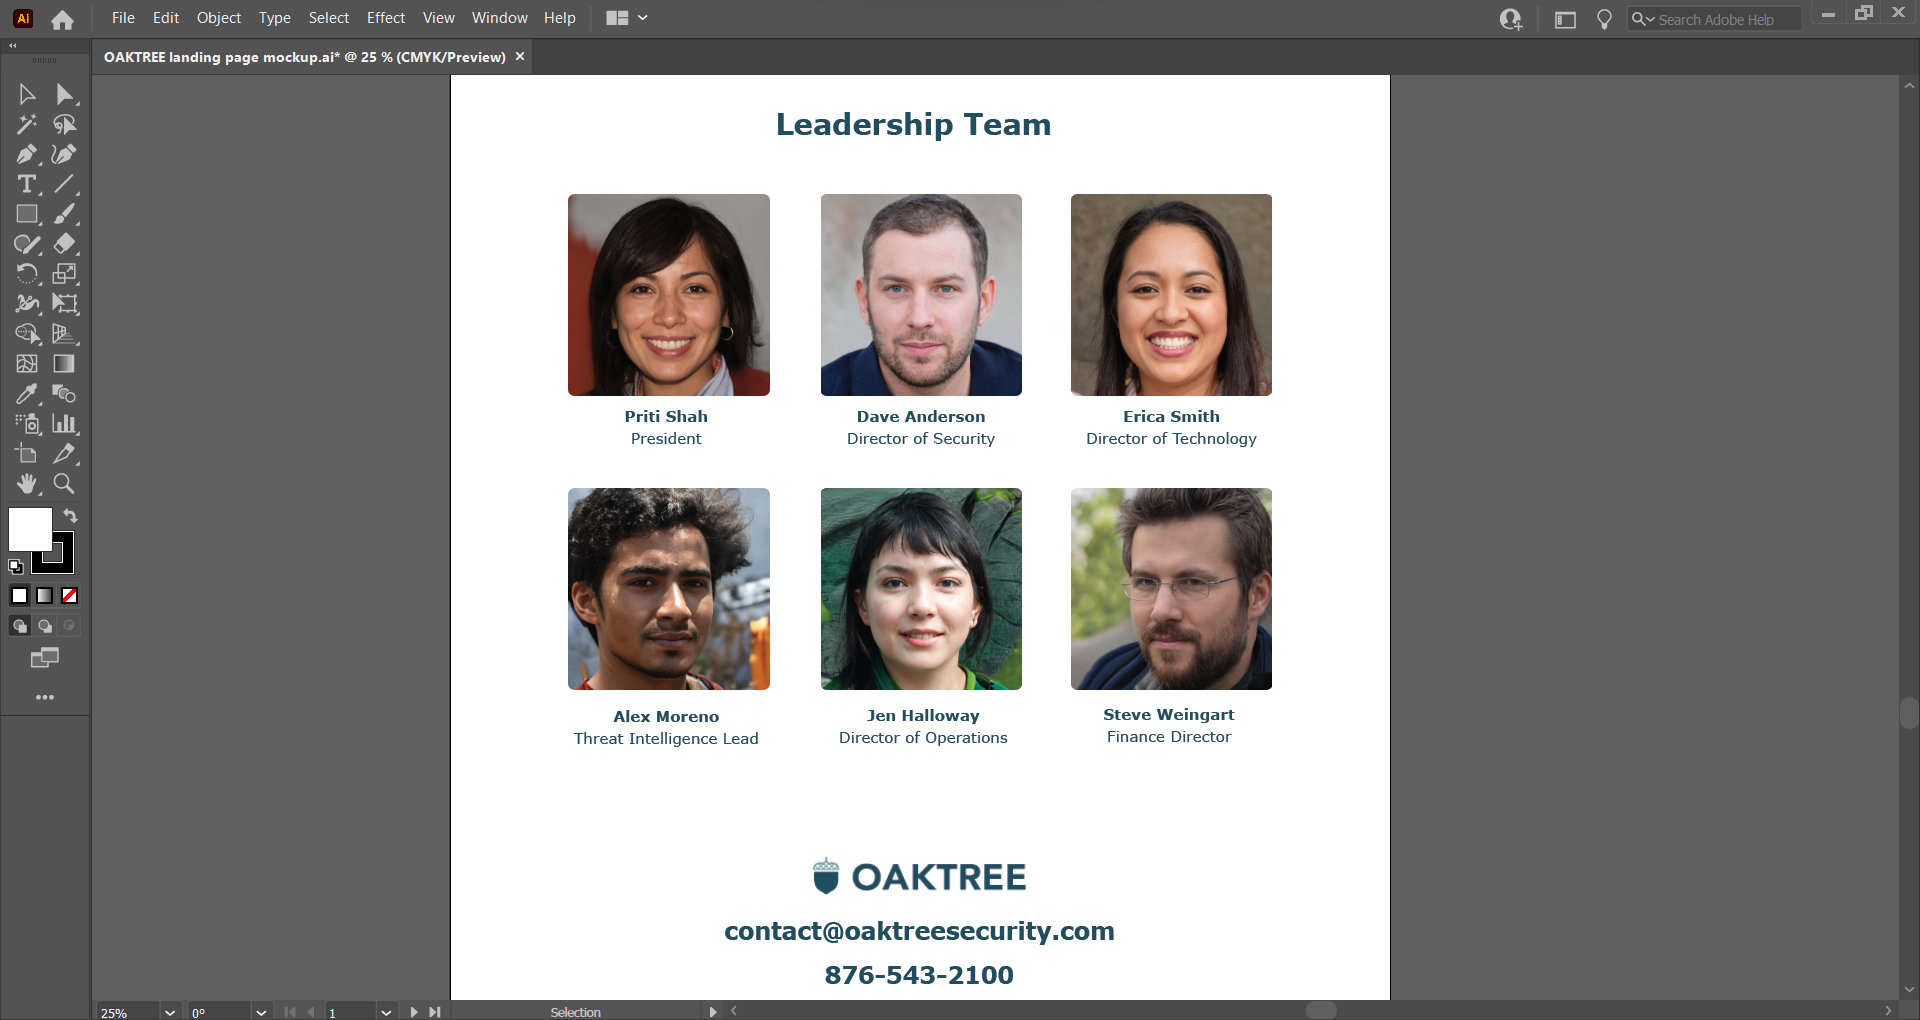 A screenshot of the OAKTREE leadership team landing page section of the OAKTREE website within Adobe Illustrator.